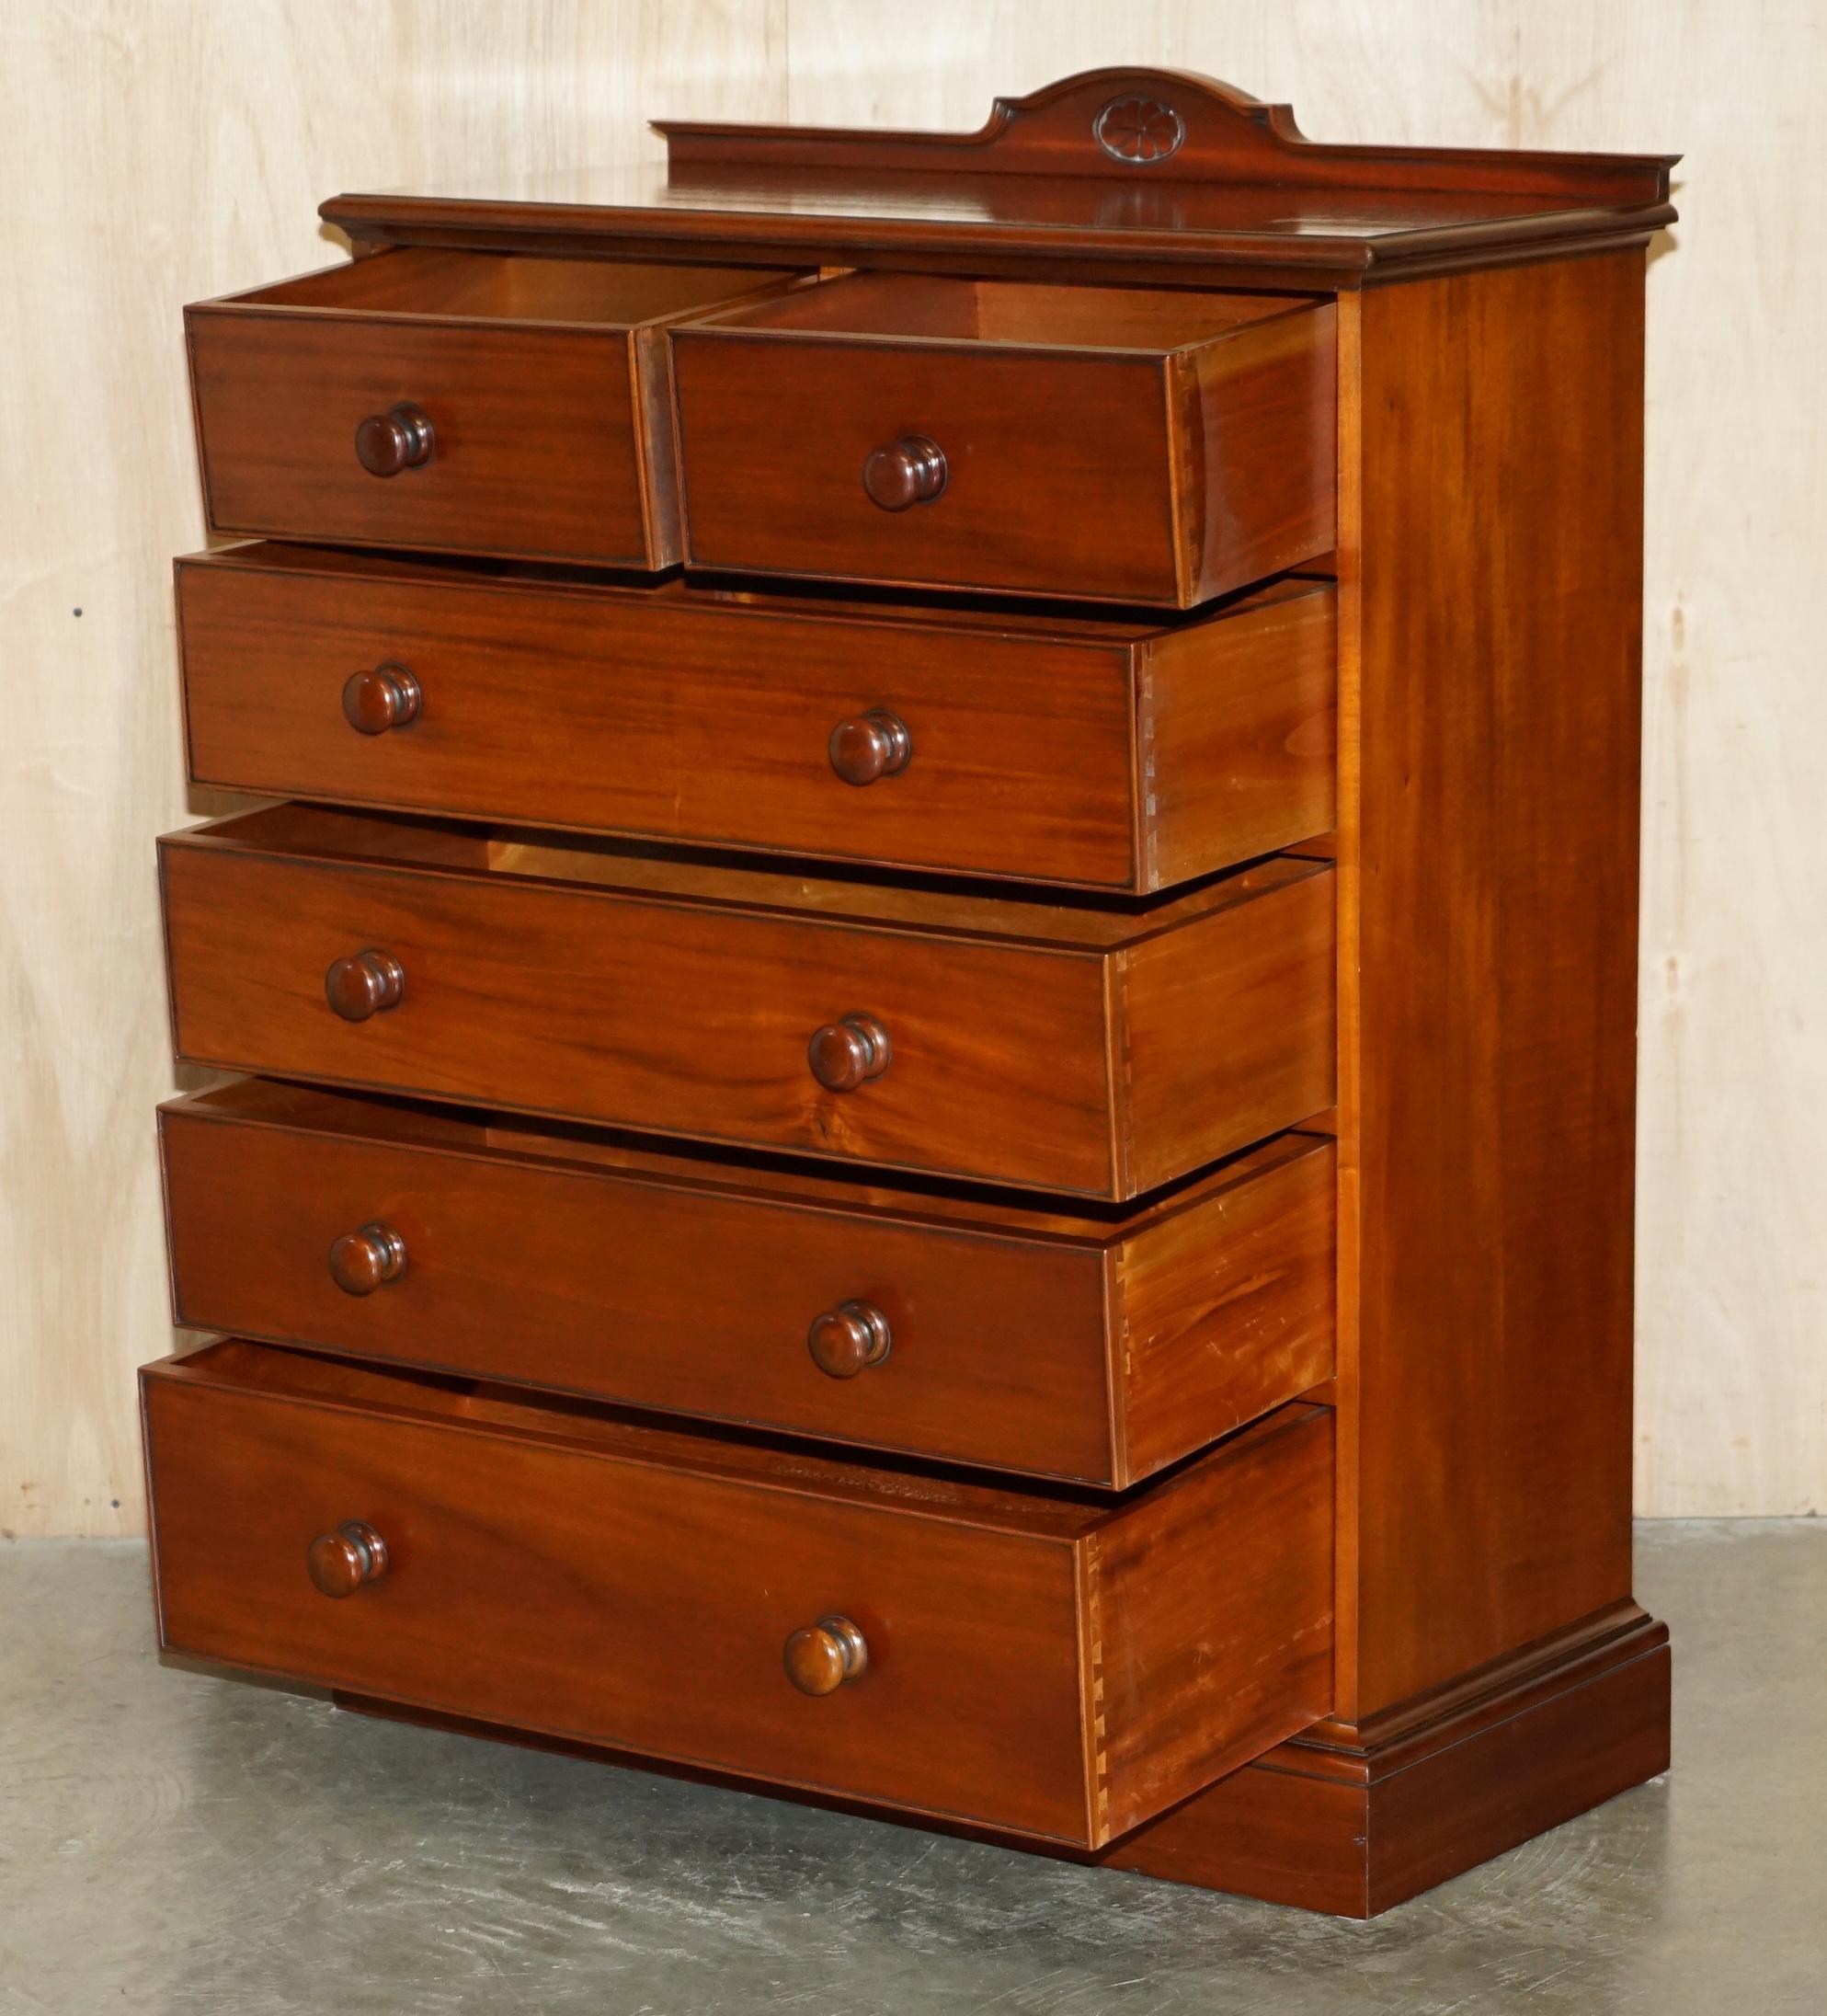 EXQUISITE PAIR OF ViNTAGE FLAMED HARDWOOD CHEST OF DRAWERS PART OF A SUITE For Sale 6